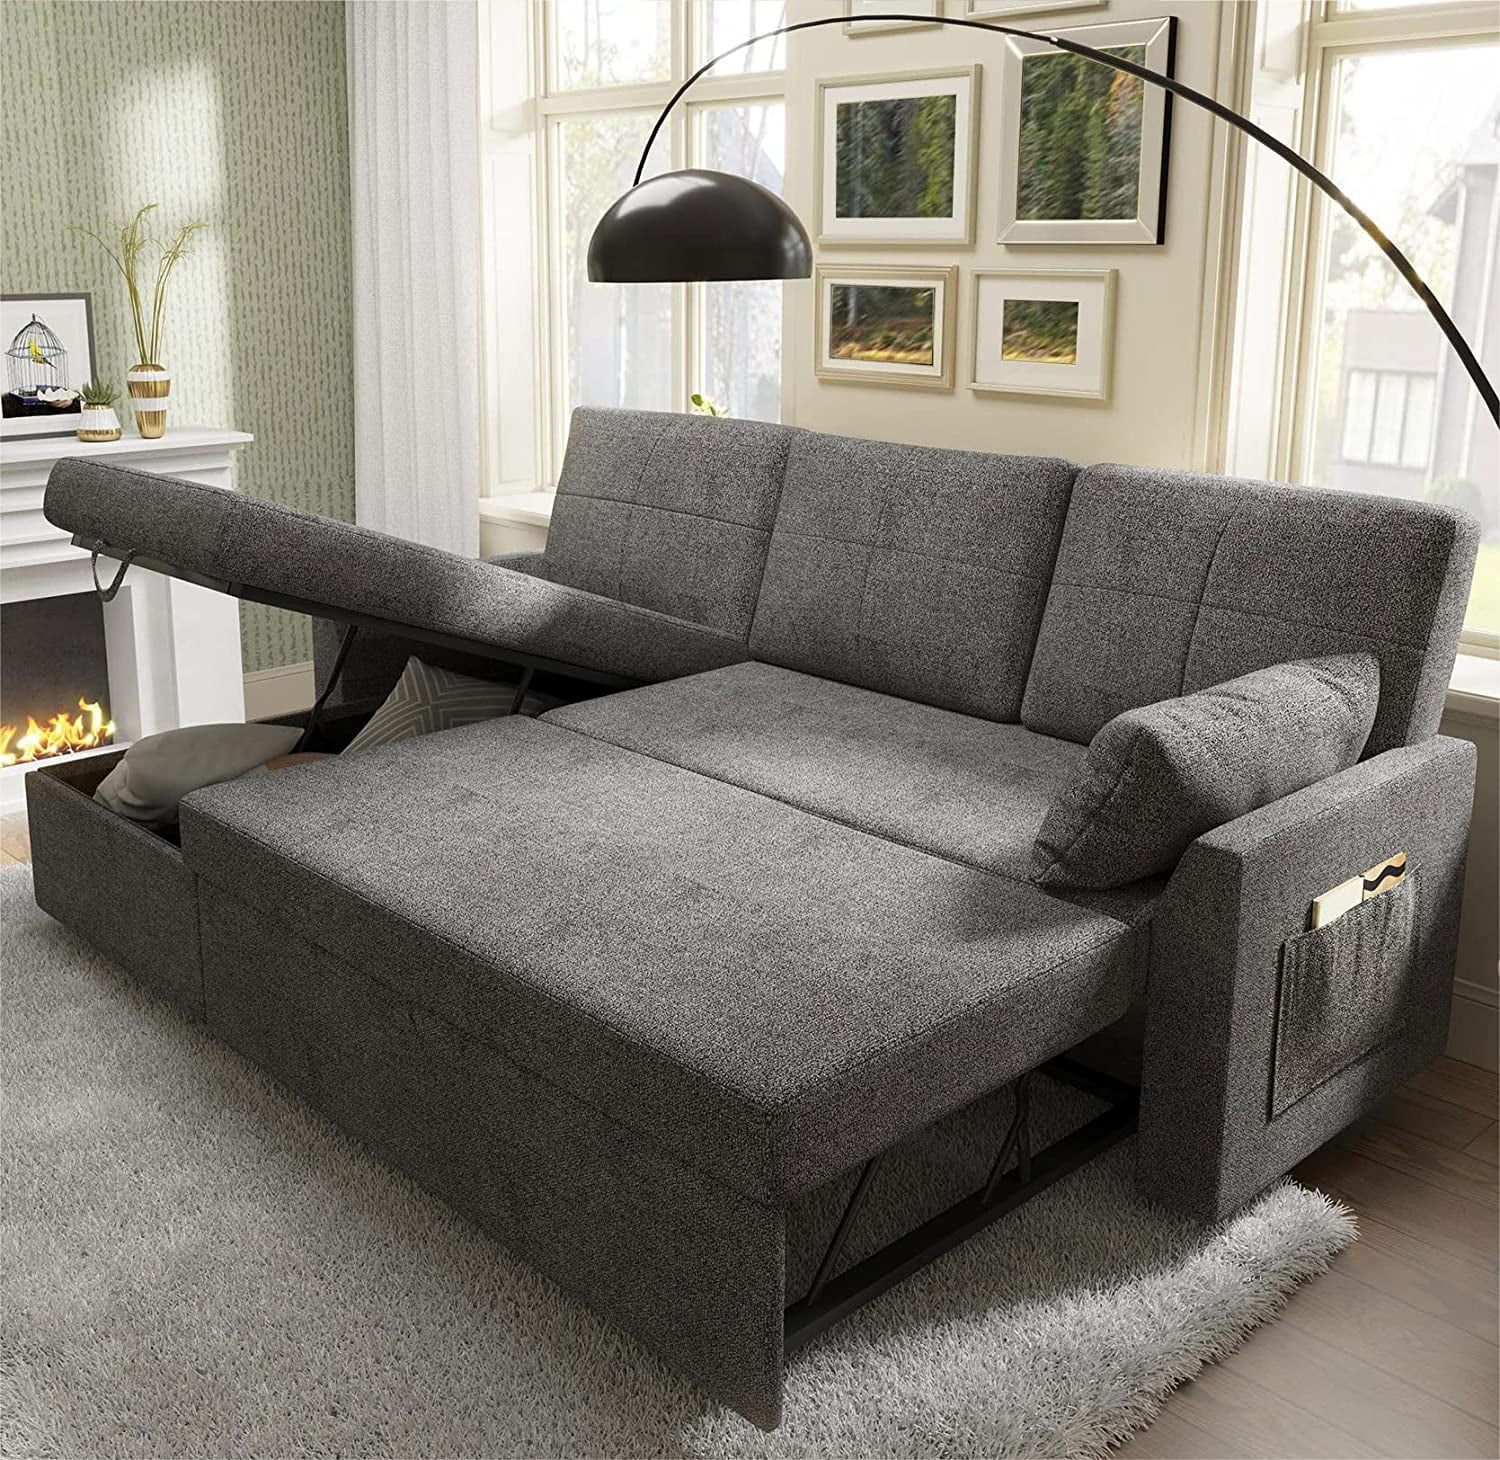 Papajet Sofa Bed, Sleeper Sofa With Storage Chaise 2 In 1 Pull Out Couch Bed  For Living Room, Sectional Couch With Pull Out Bed Gray – Walmart Regarding Pull Out Couch Beds (Gallery 4 of 20)